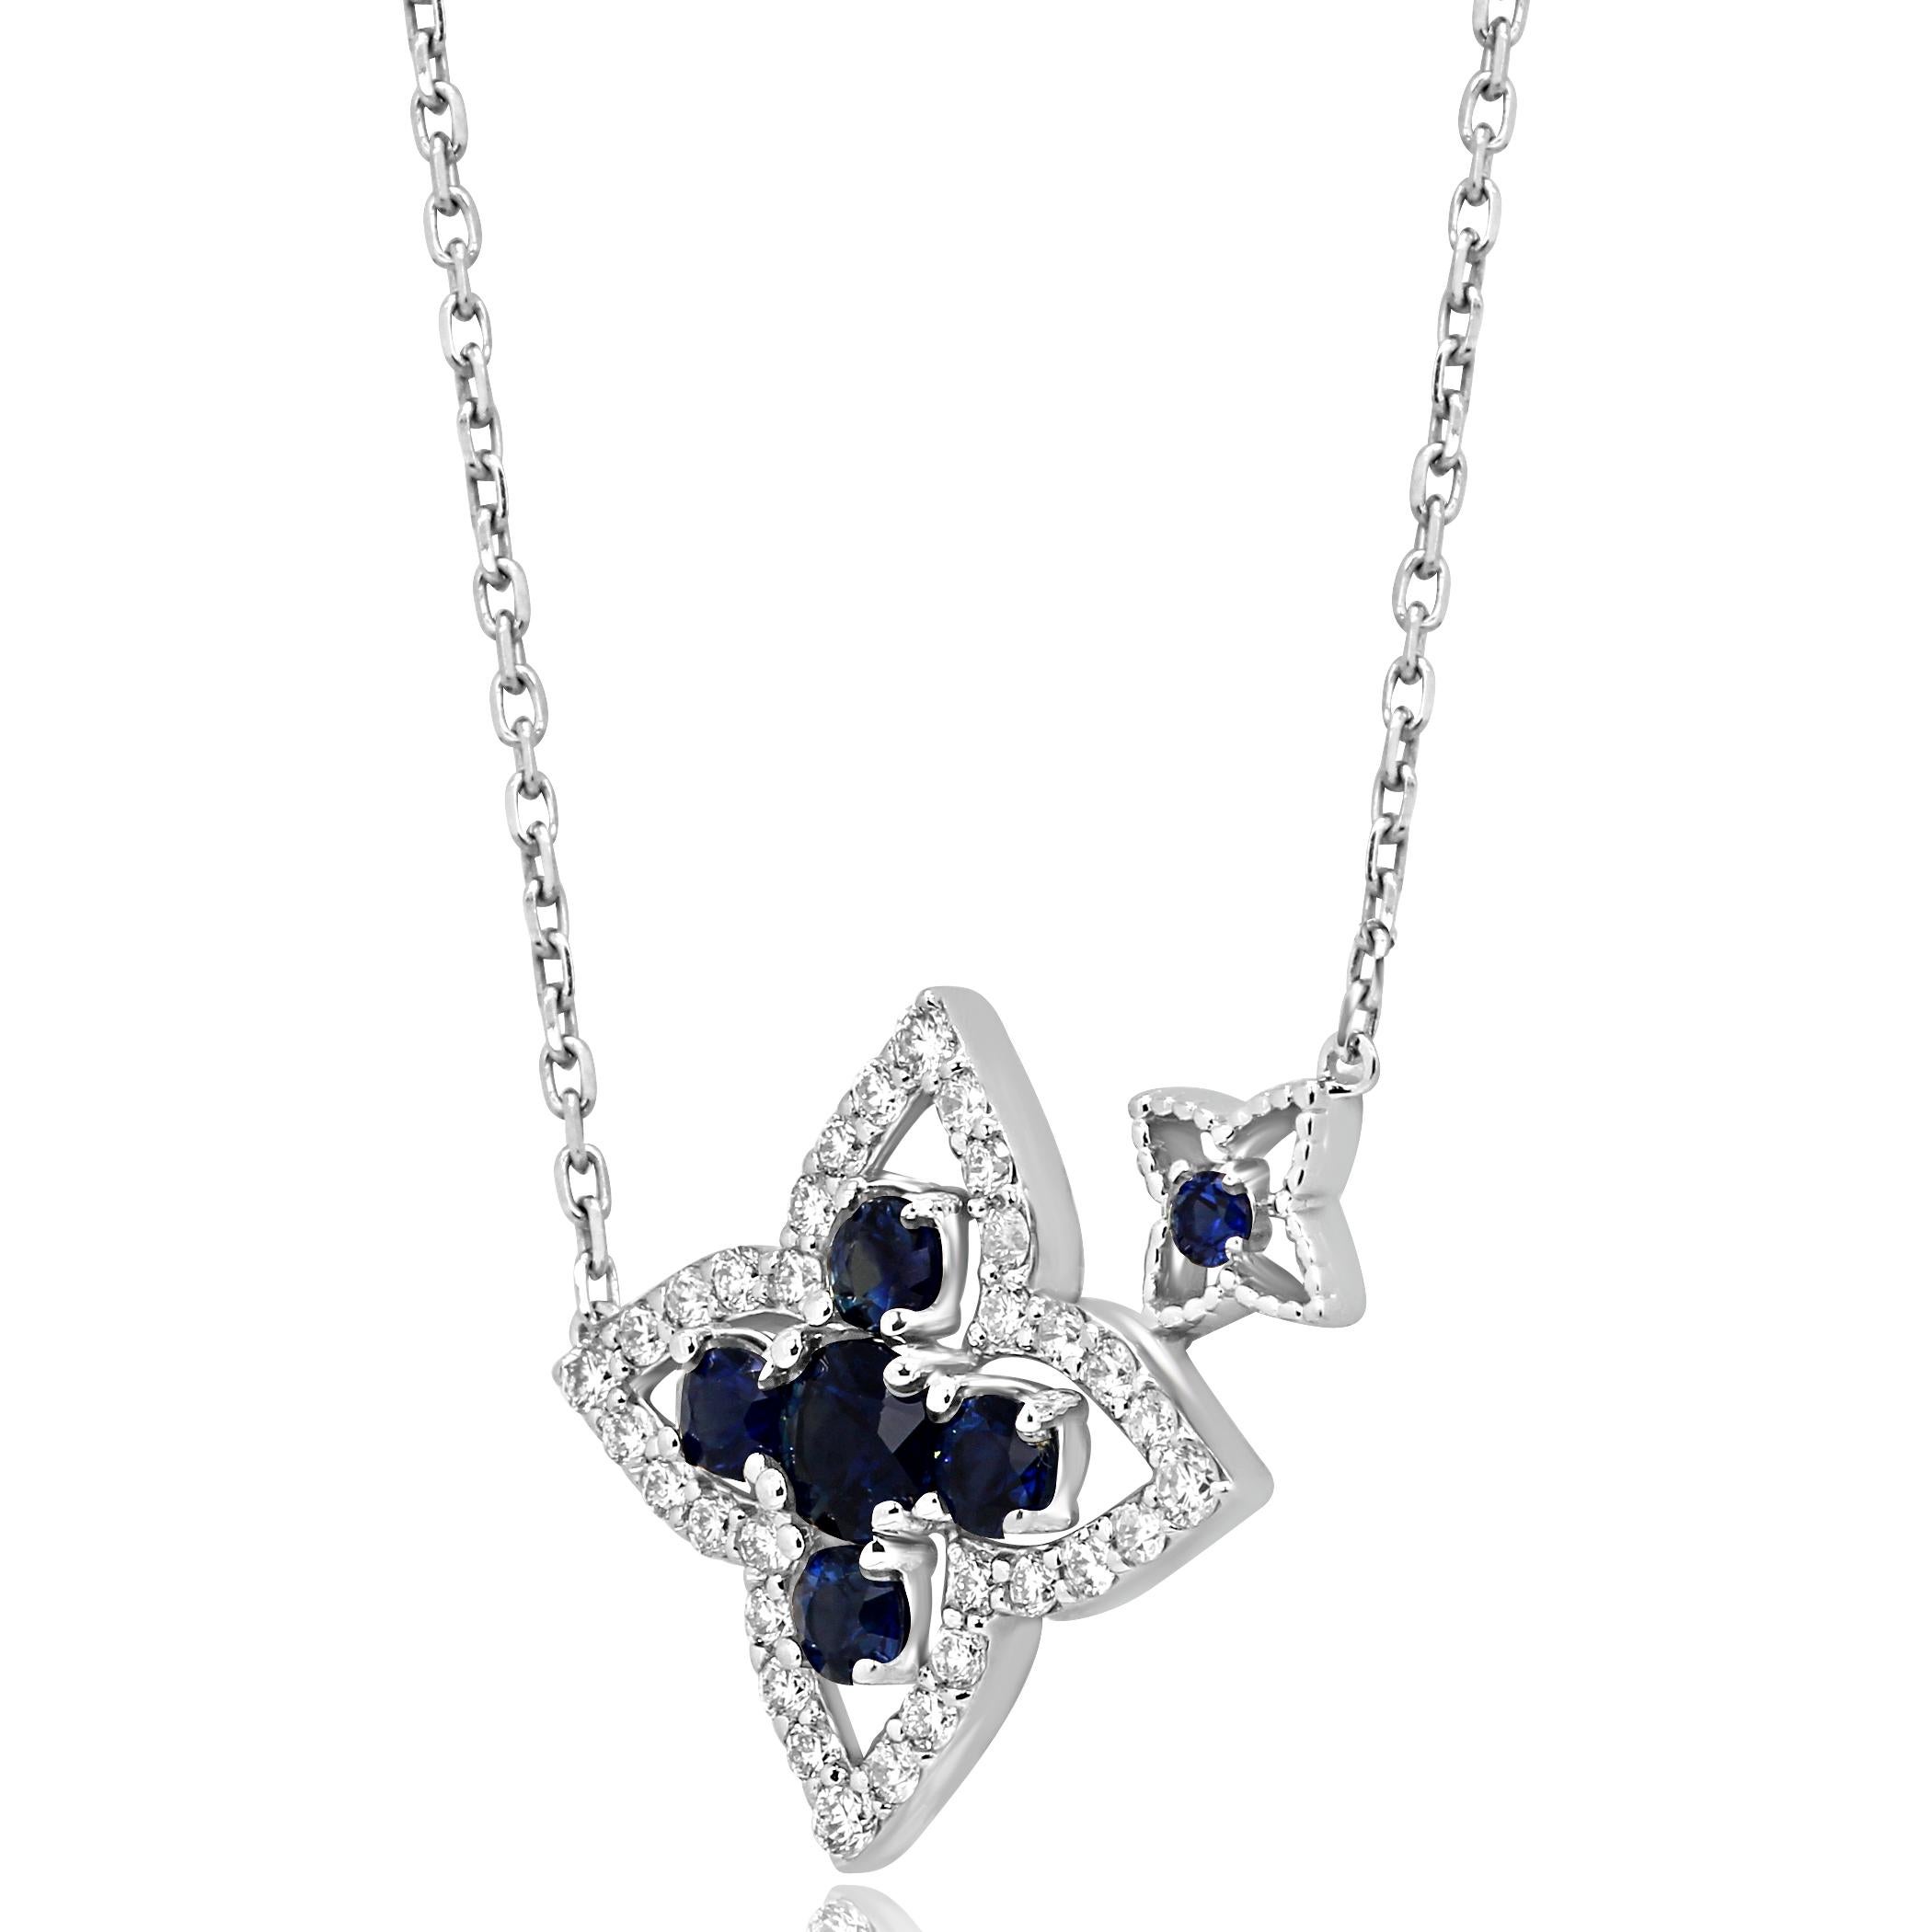 6 Blue Sapphire Round 1.08 Carat With White Round Diamonds around 0.45 Carat in a Chic 14K White Gold Necklace.

Style available in different price ranges. Prices are based on your selection of 4C's Cut, Color, Carat, Clarity. Please contact us for